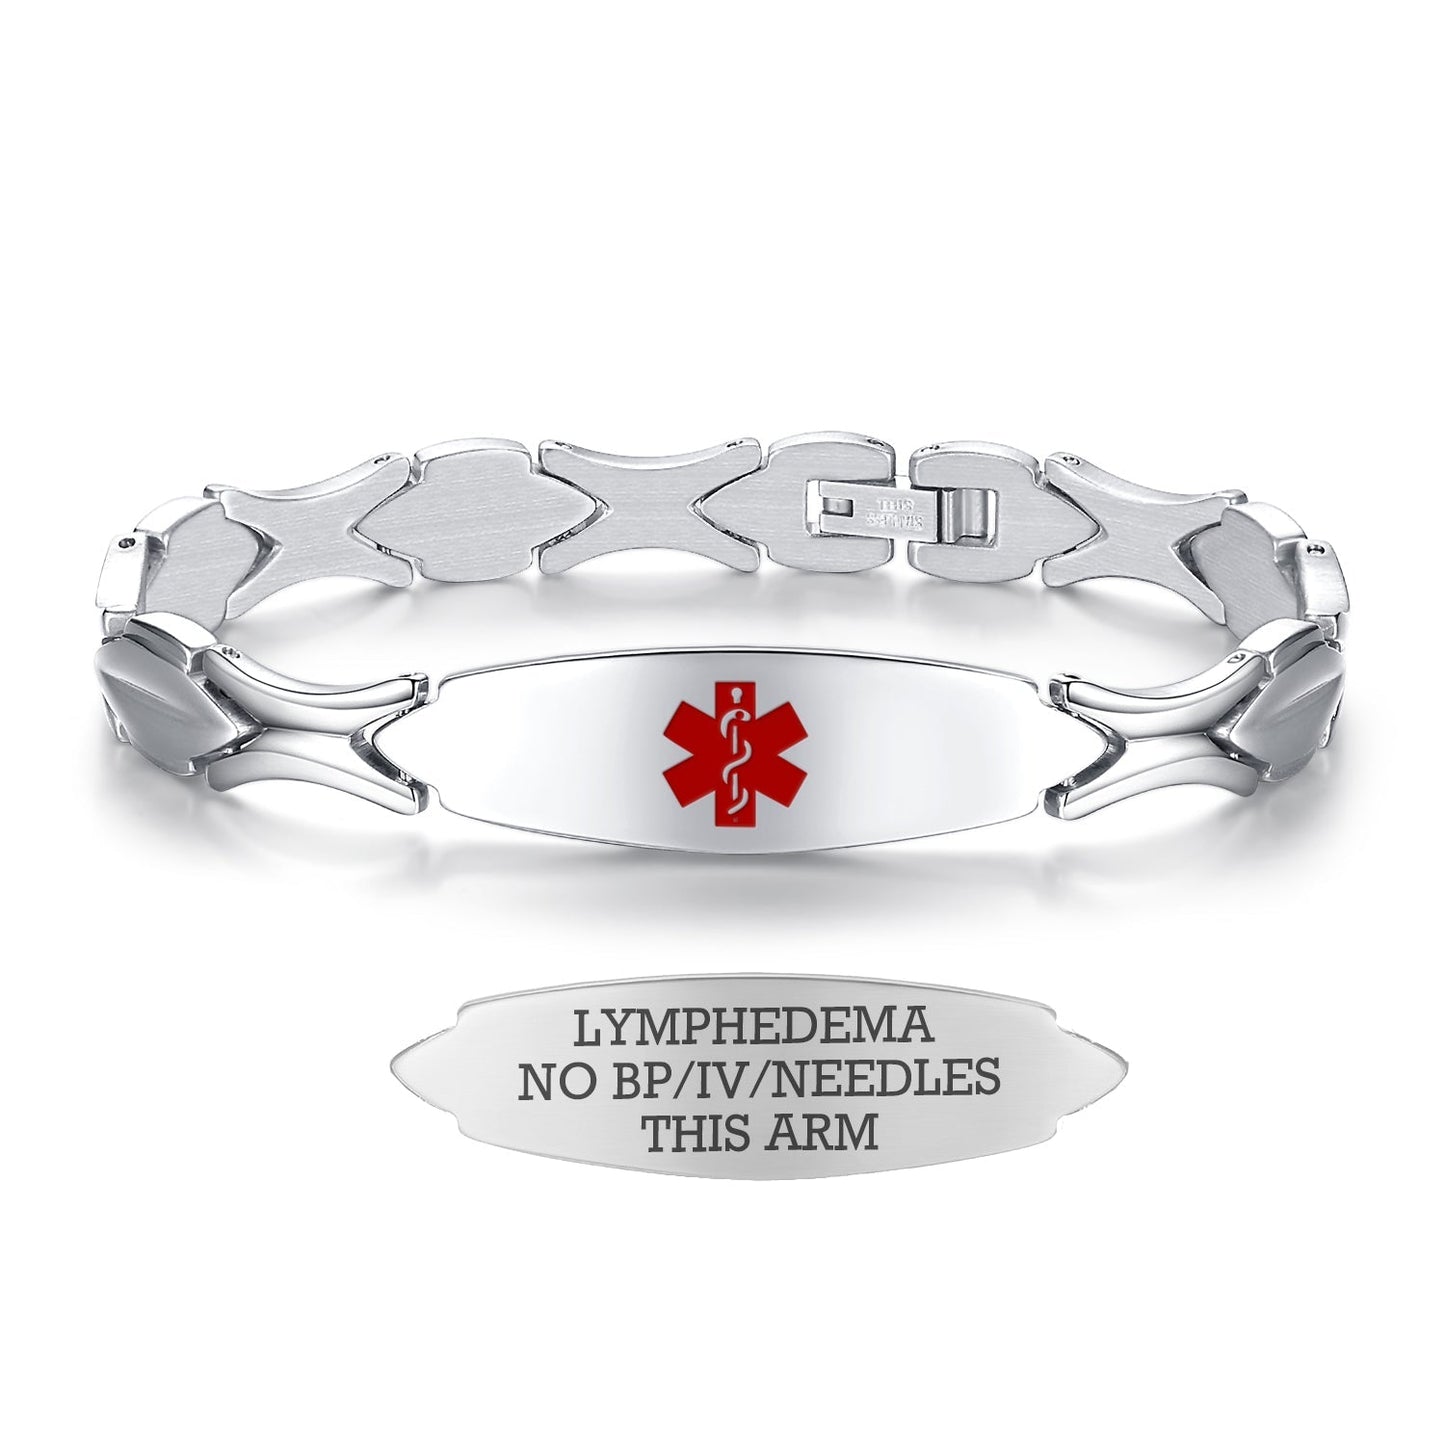 Stainless Steel Fashion Medical Id Bracelet For Women with pre-engraving medical conditions